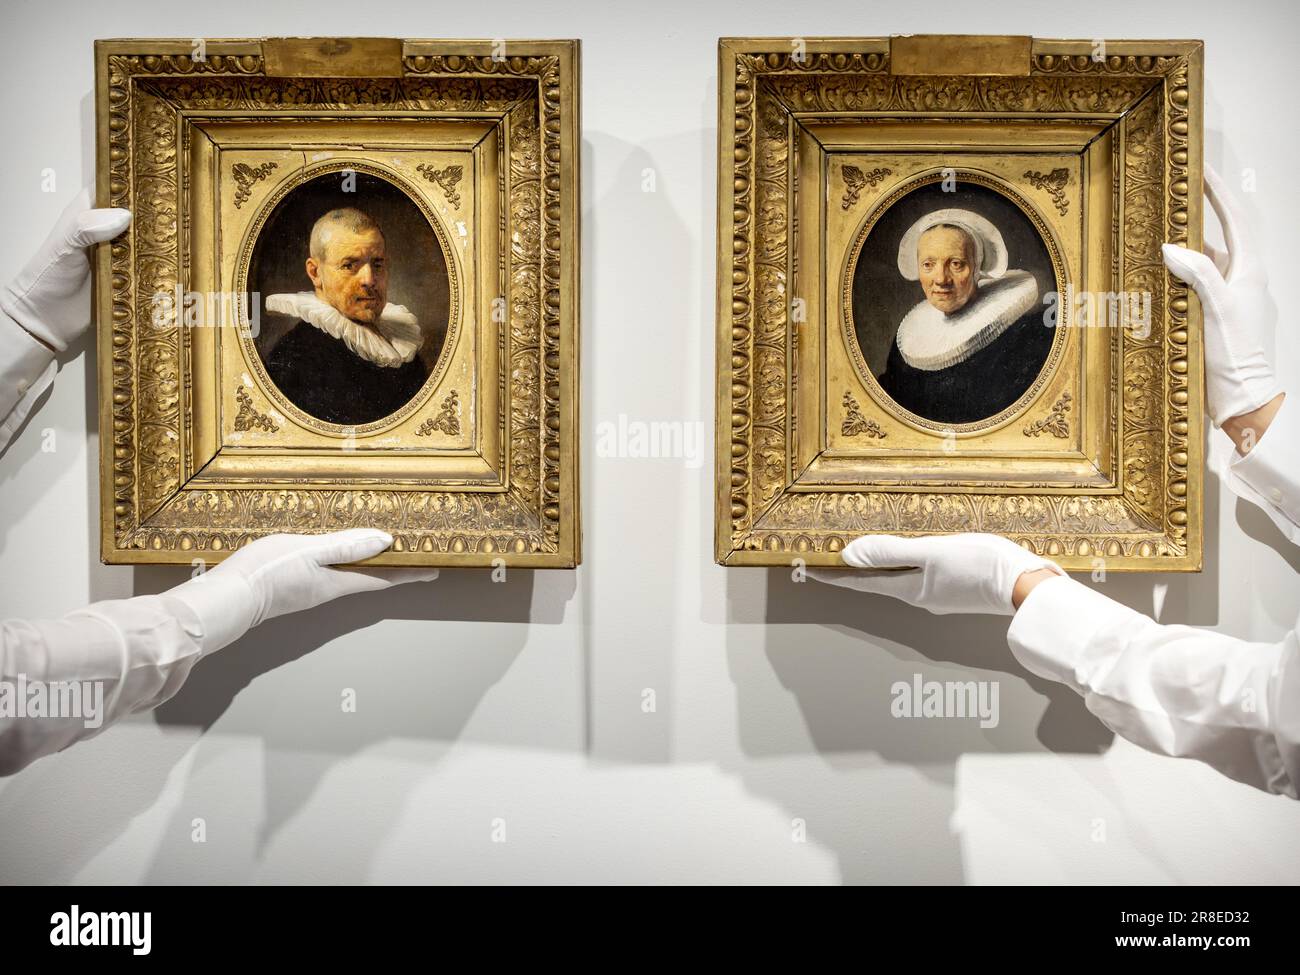 AMSTERDAM - Two rediscovered portraits attributed to Rembrandt are being hung at auction house Christie's. These are works from 1635 that have remained in private hands until now. The paintings will be auctioned on July 6 by Christie's in London. ANP KOEN VAN WEEL netherlands out - belgium out Stock Photo